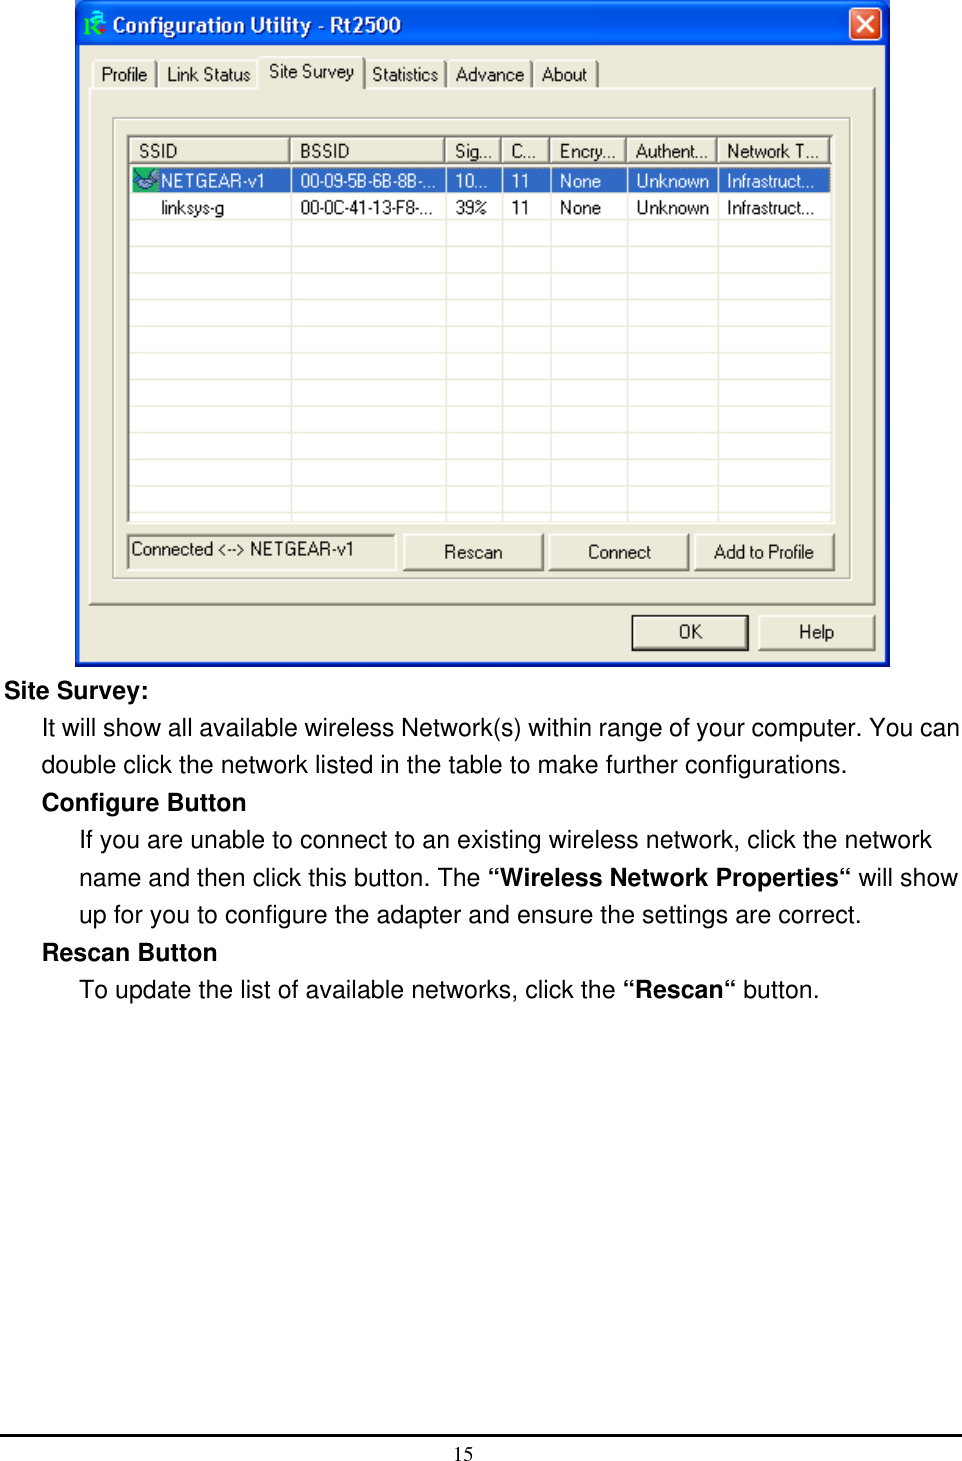   Site Survey: It will show all available wireless Network(s) within range of your computer. You can double click the network listed in the table to make further configurations. Configure Button If you are unable to connect to an existing wireless network, click the network name and then click this button. The “Wireless Network Properties“ will show up for you to configure the adapter and ensure the settings are correct. Rescan Button To update the list of available networks, click the “Rescan“ button.  15  